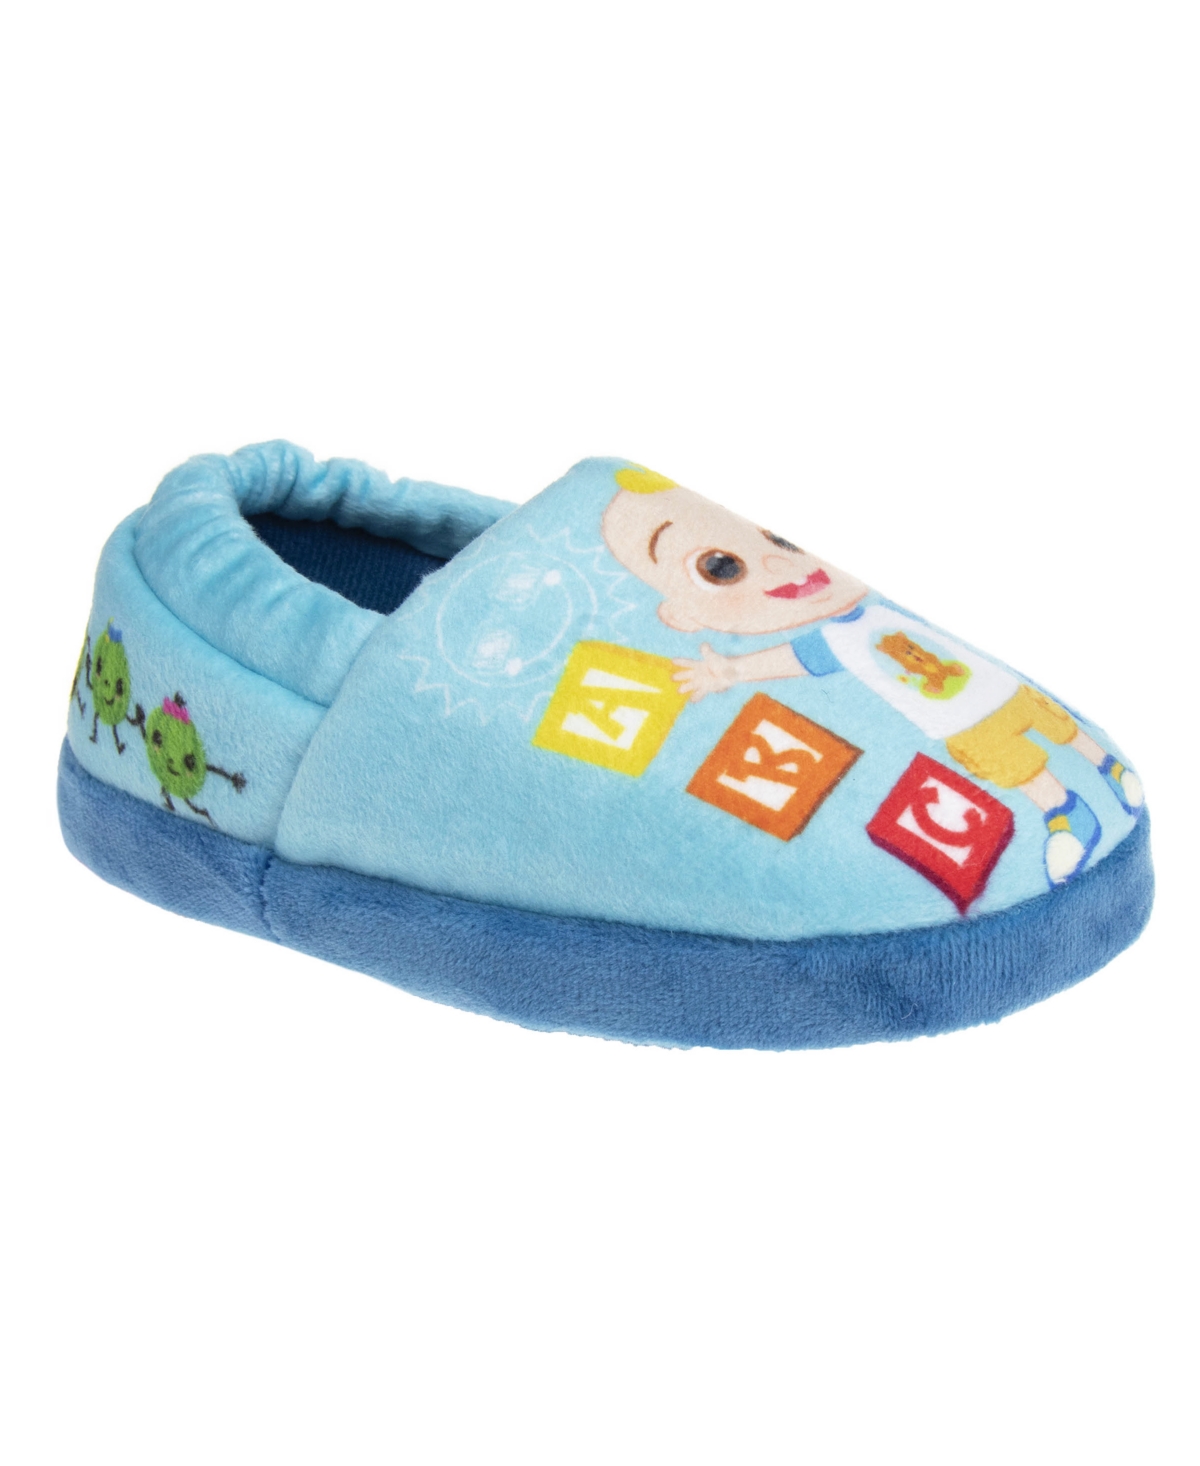 COCOMELON TODDLER BOYS DUAL SIZES HOUSE SLIPPERS